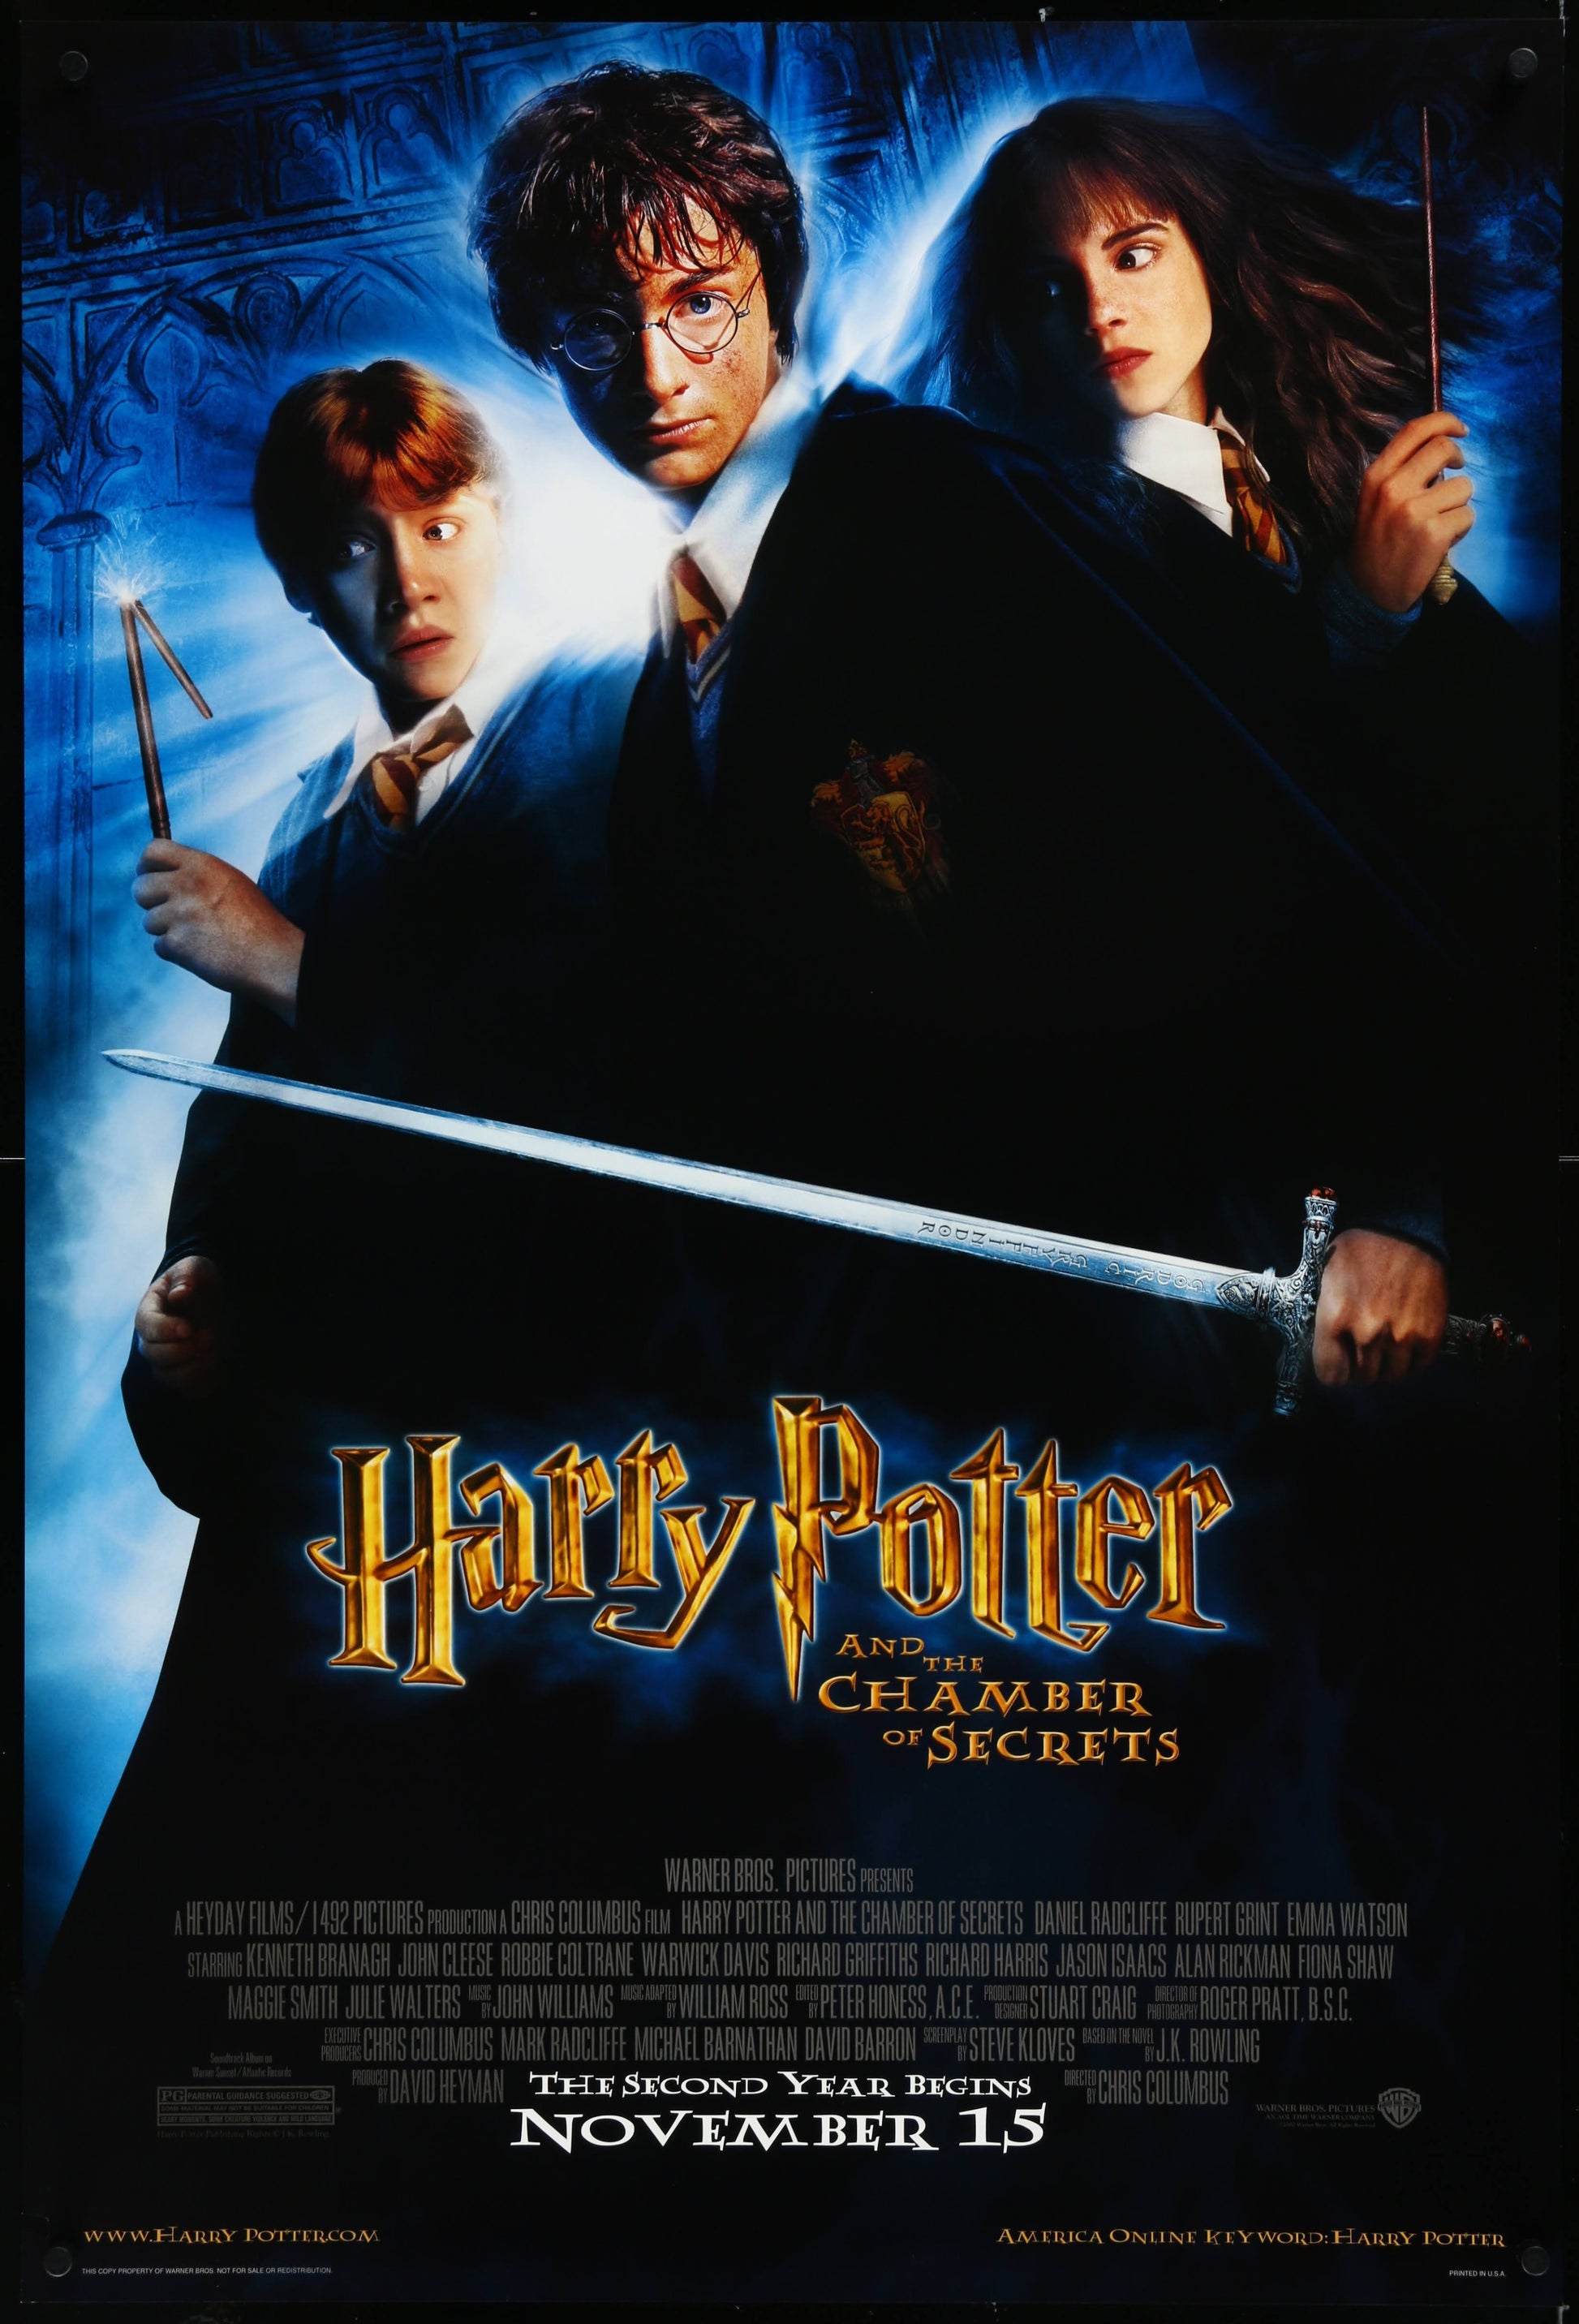 Harry Potter And The Chamber Of Secrets - posterpalace.com